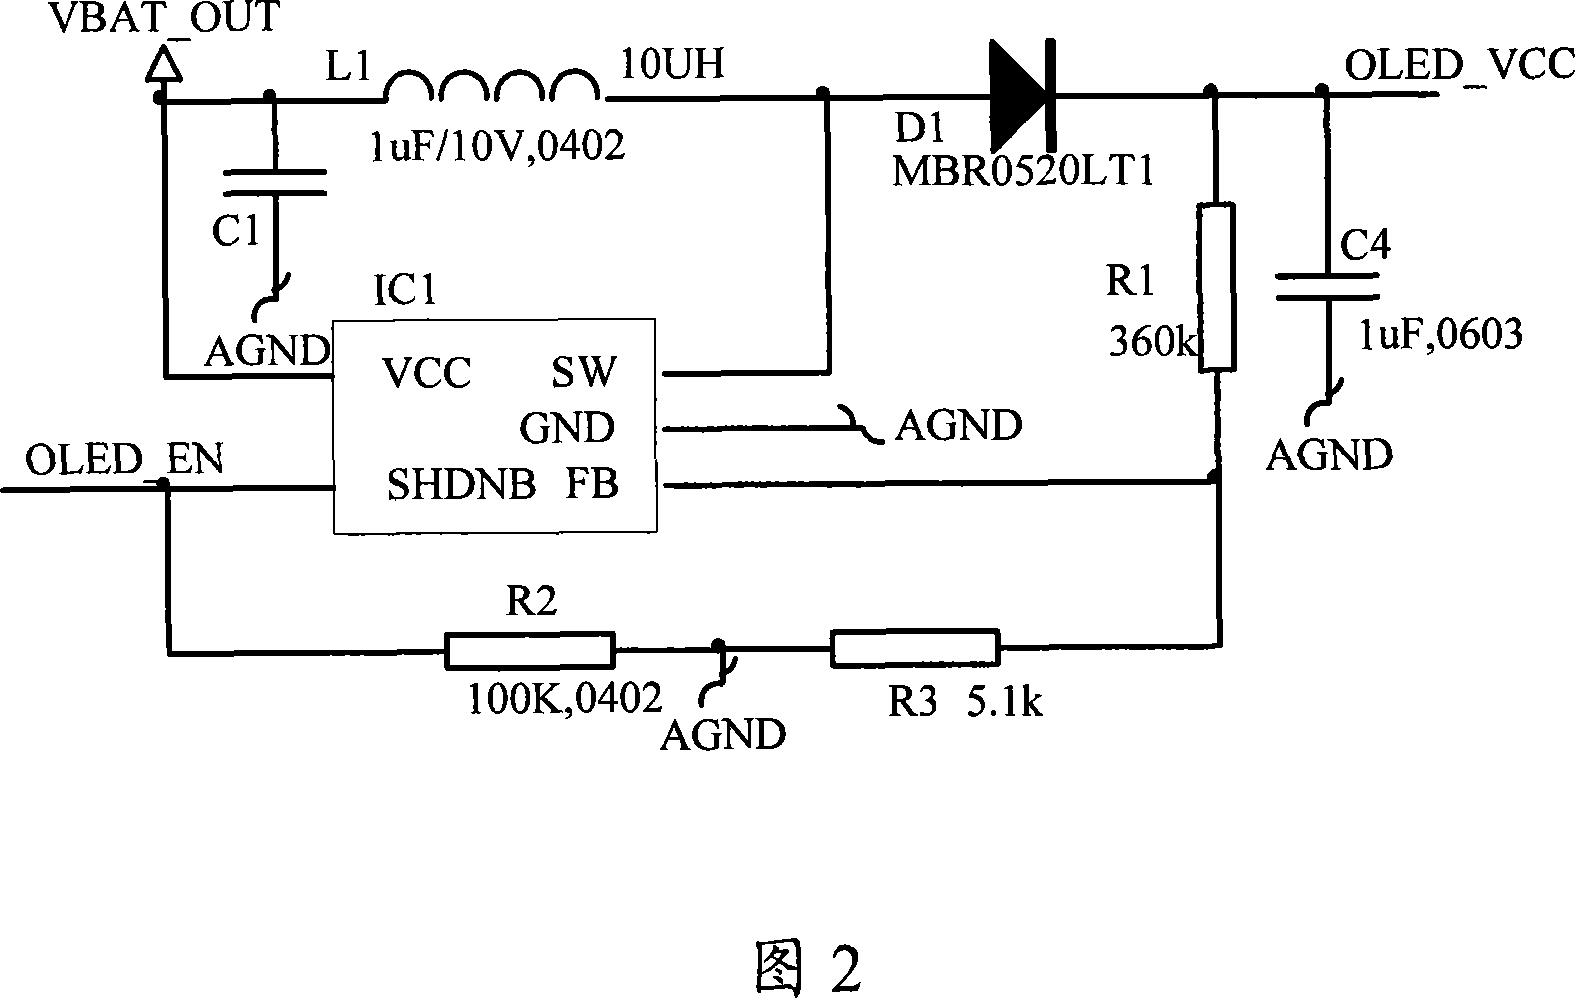 Organic luminescence display unit of the mobile phone and method for reducing the power consumption of the mobile phone